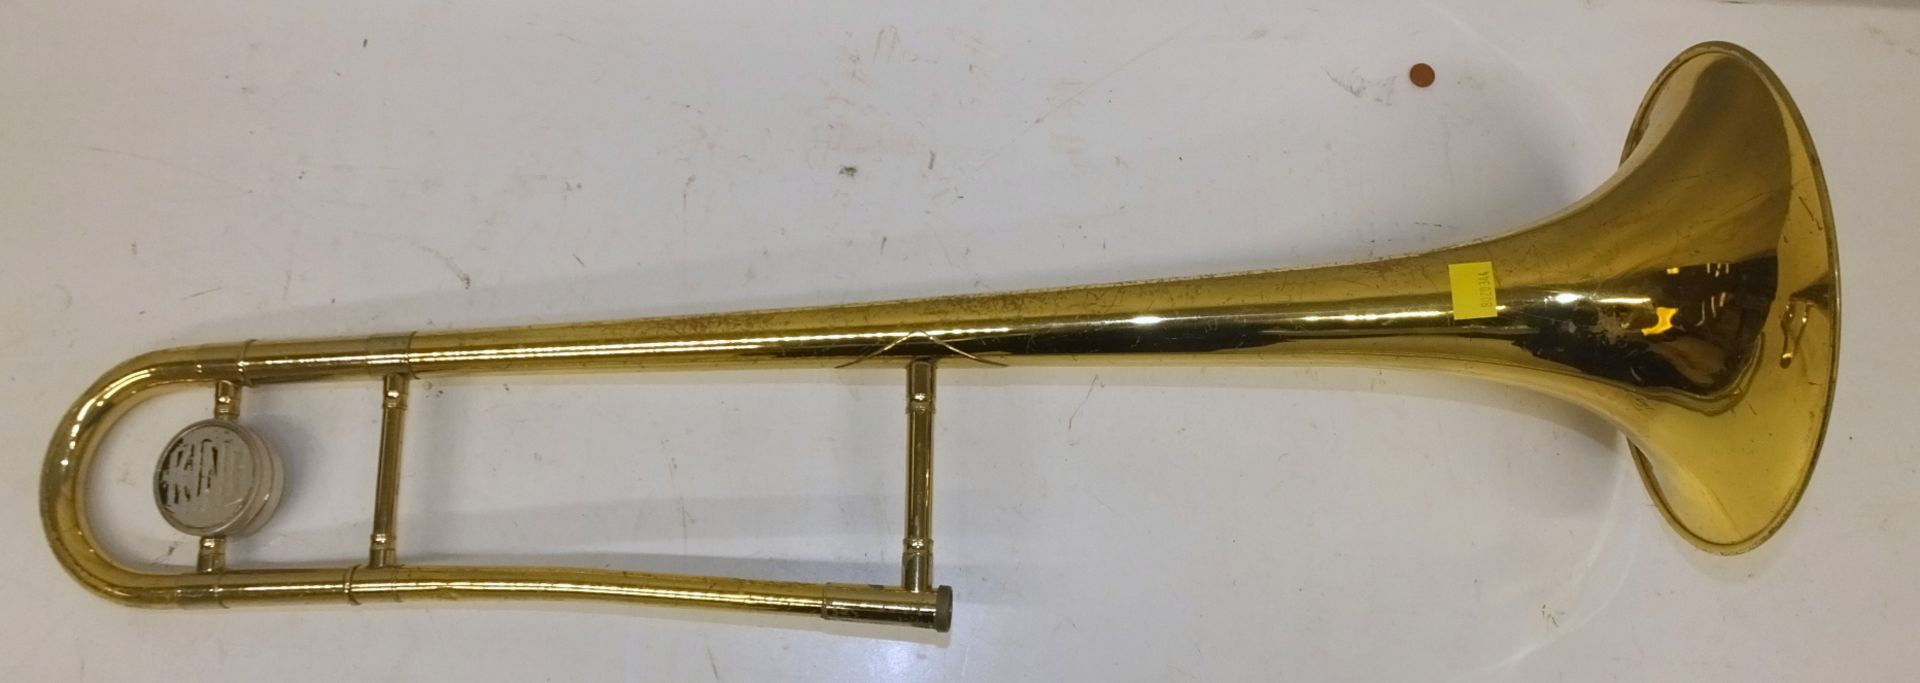 King Trombone in case - Serial Number - 108606 - A4984 (dents on instrument) - Image 6 of 16